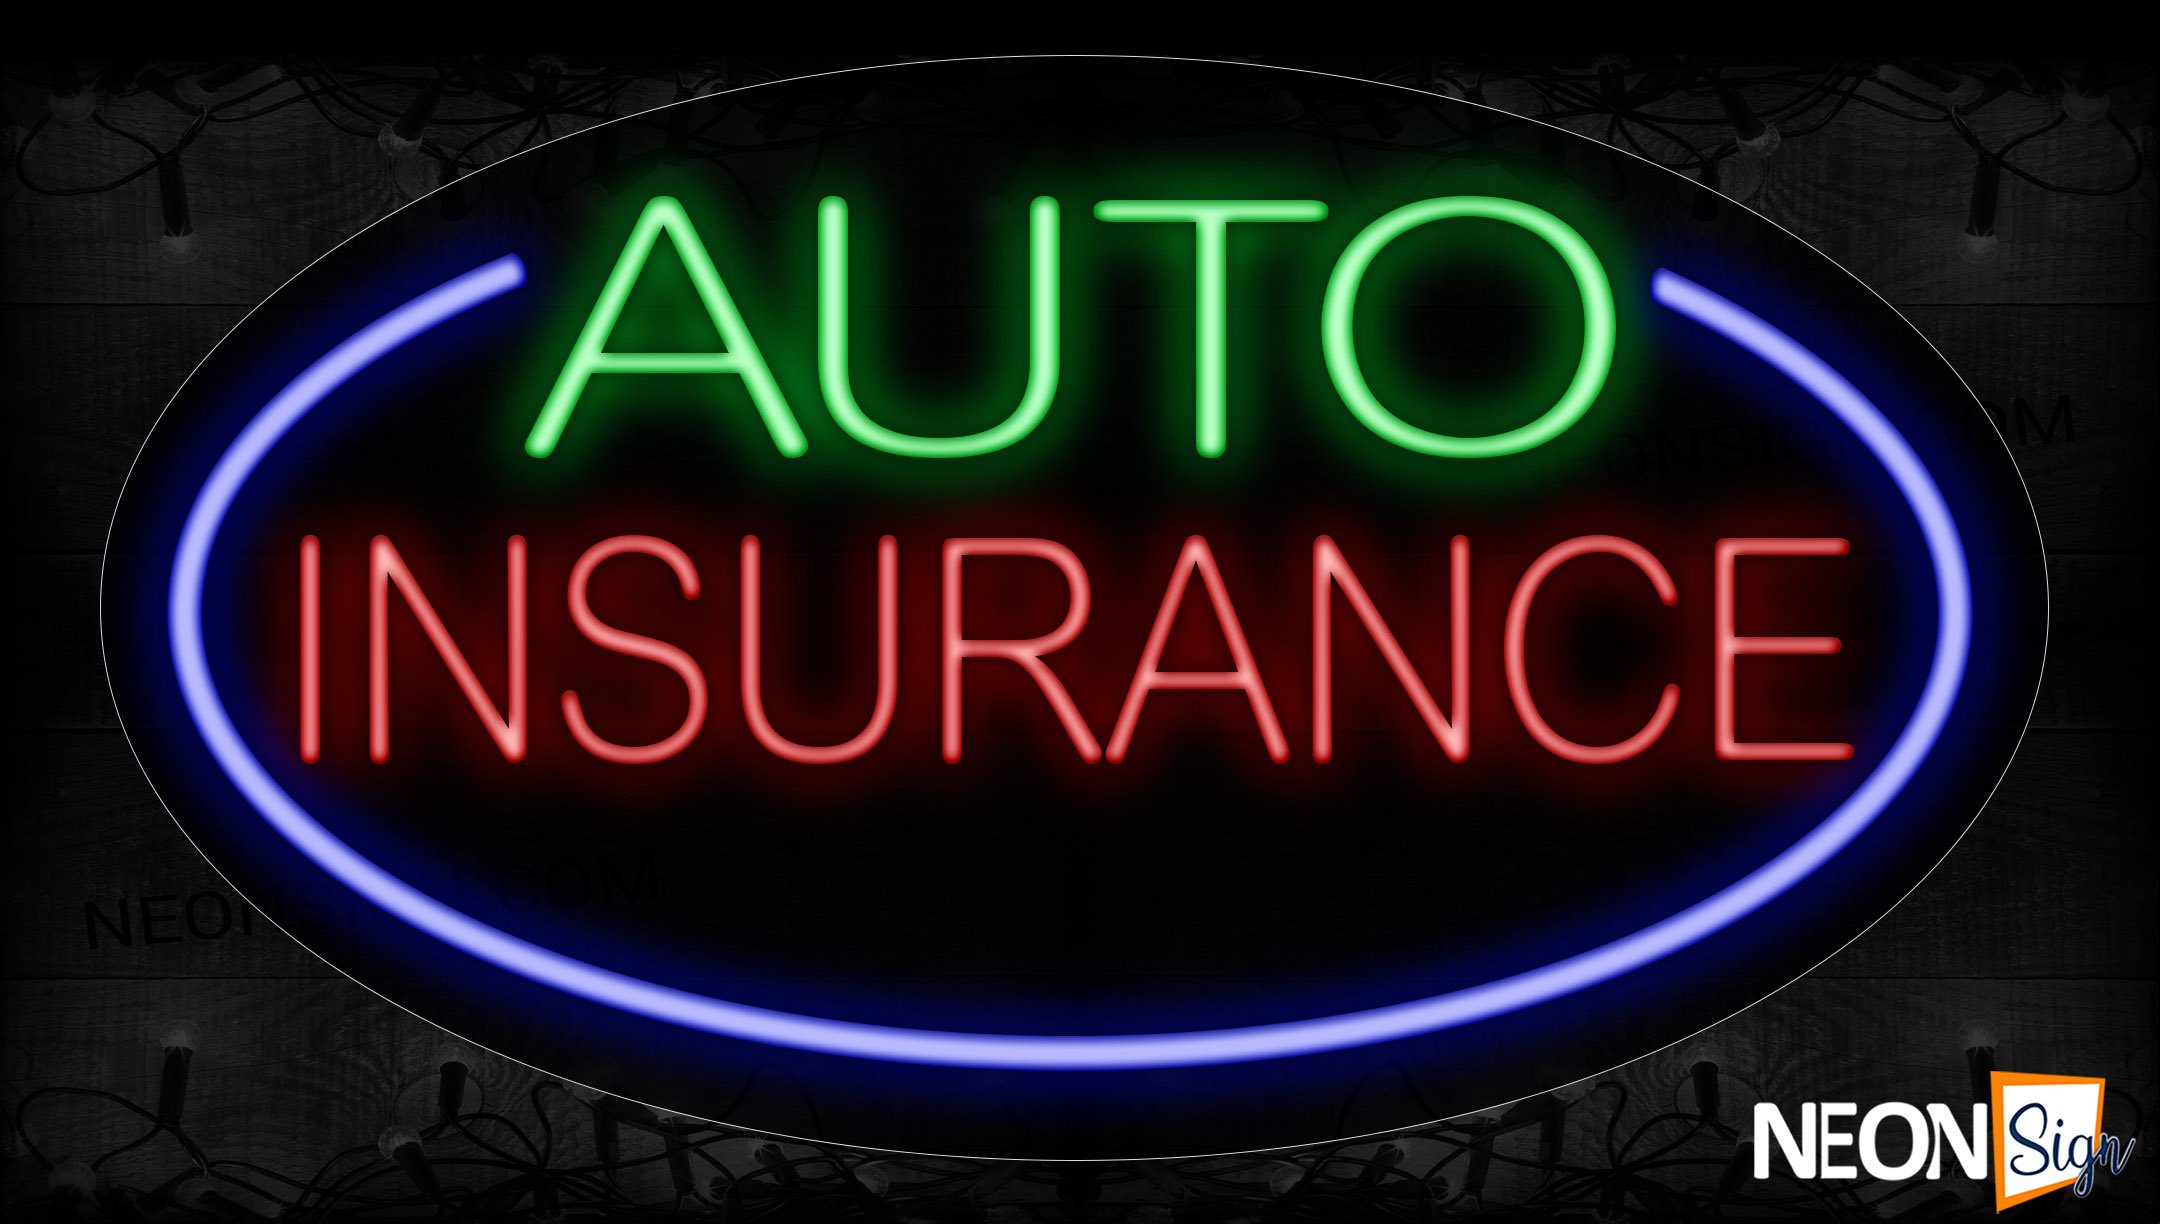 Image of 14143 Auto Insurance With Blue Oval Border Neon Signs_17x30 Contoured Black Backing